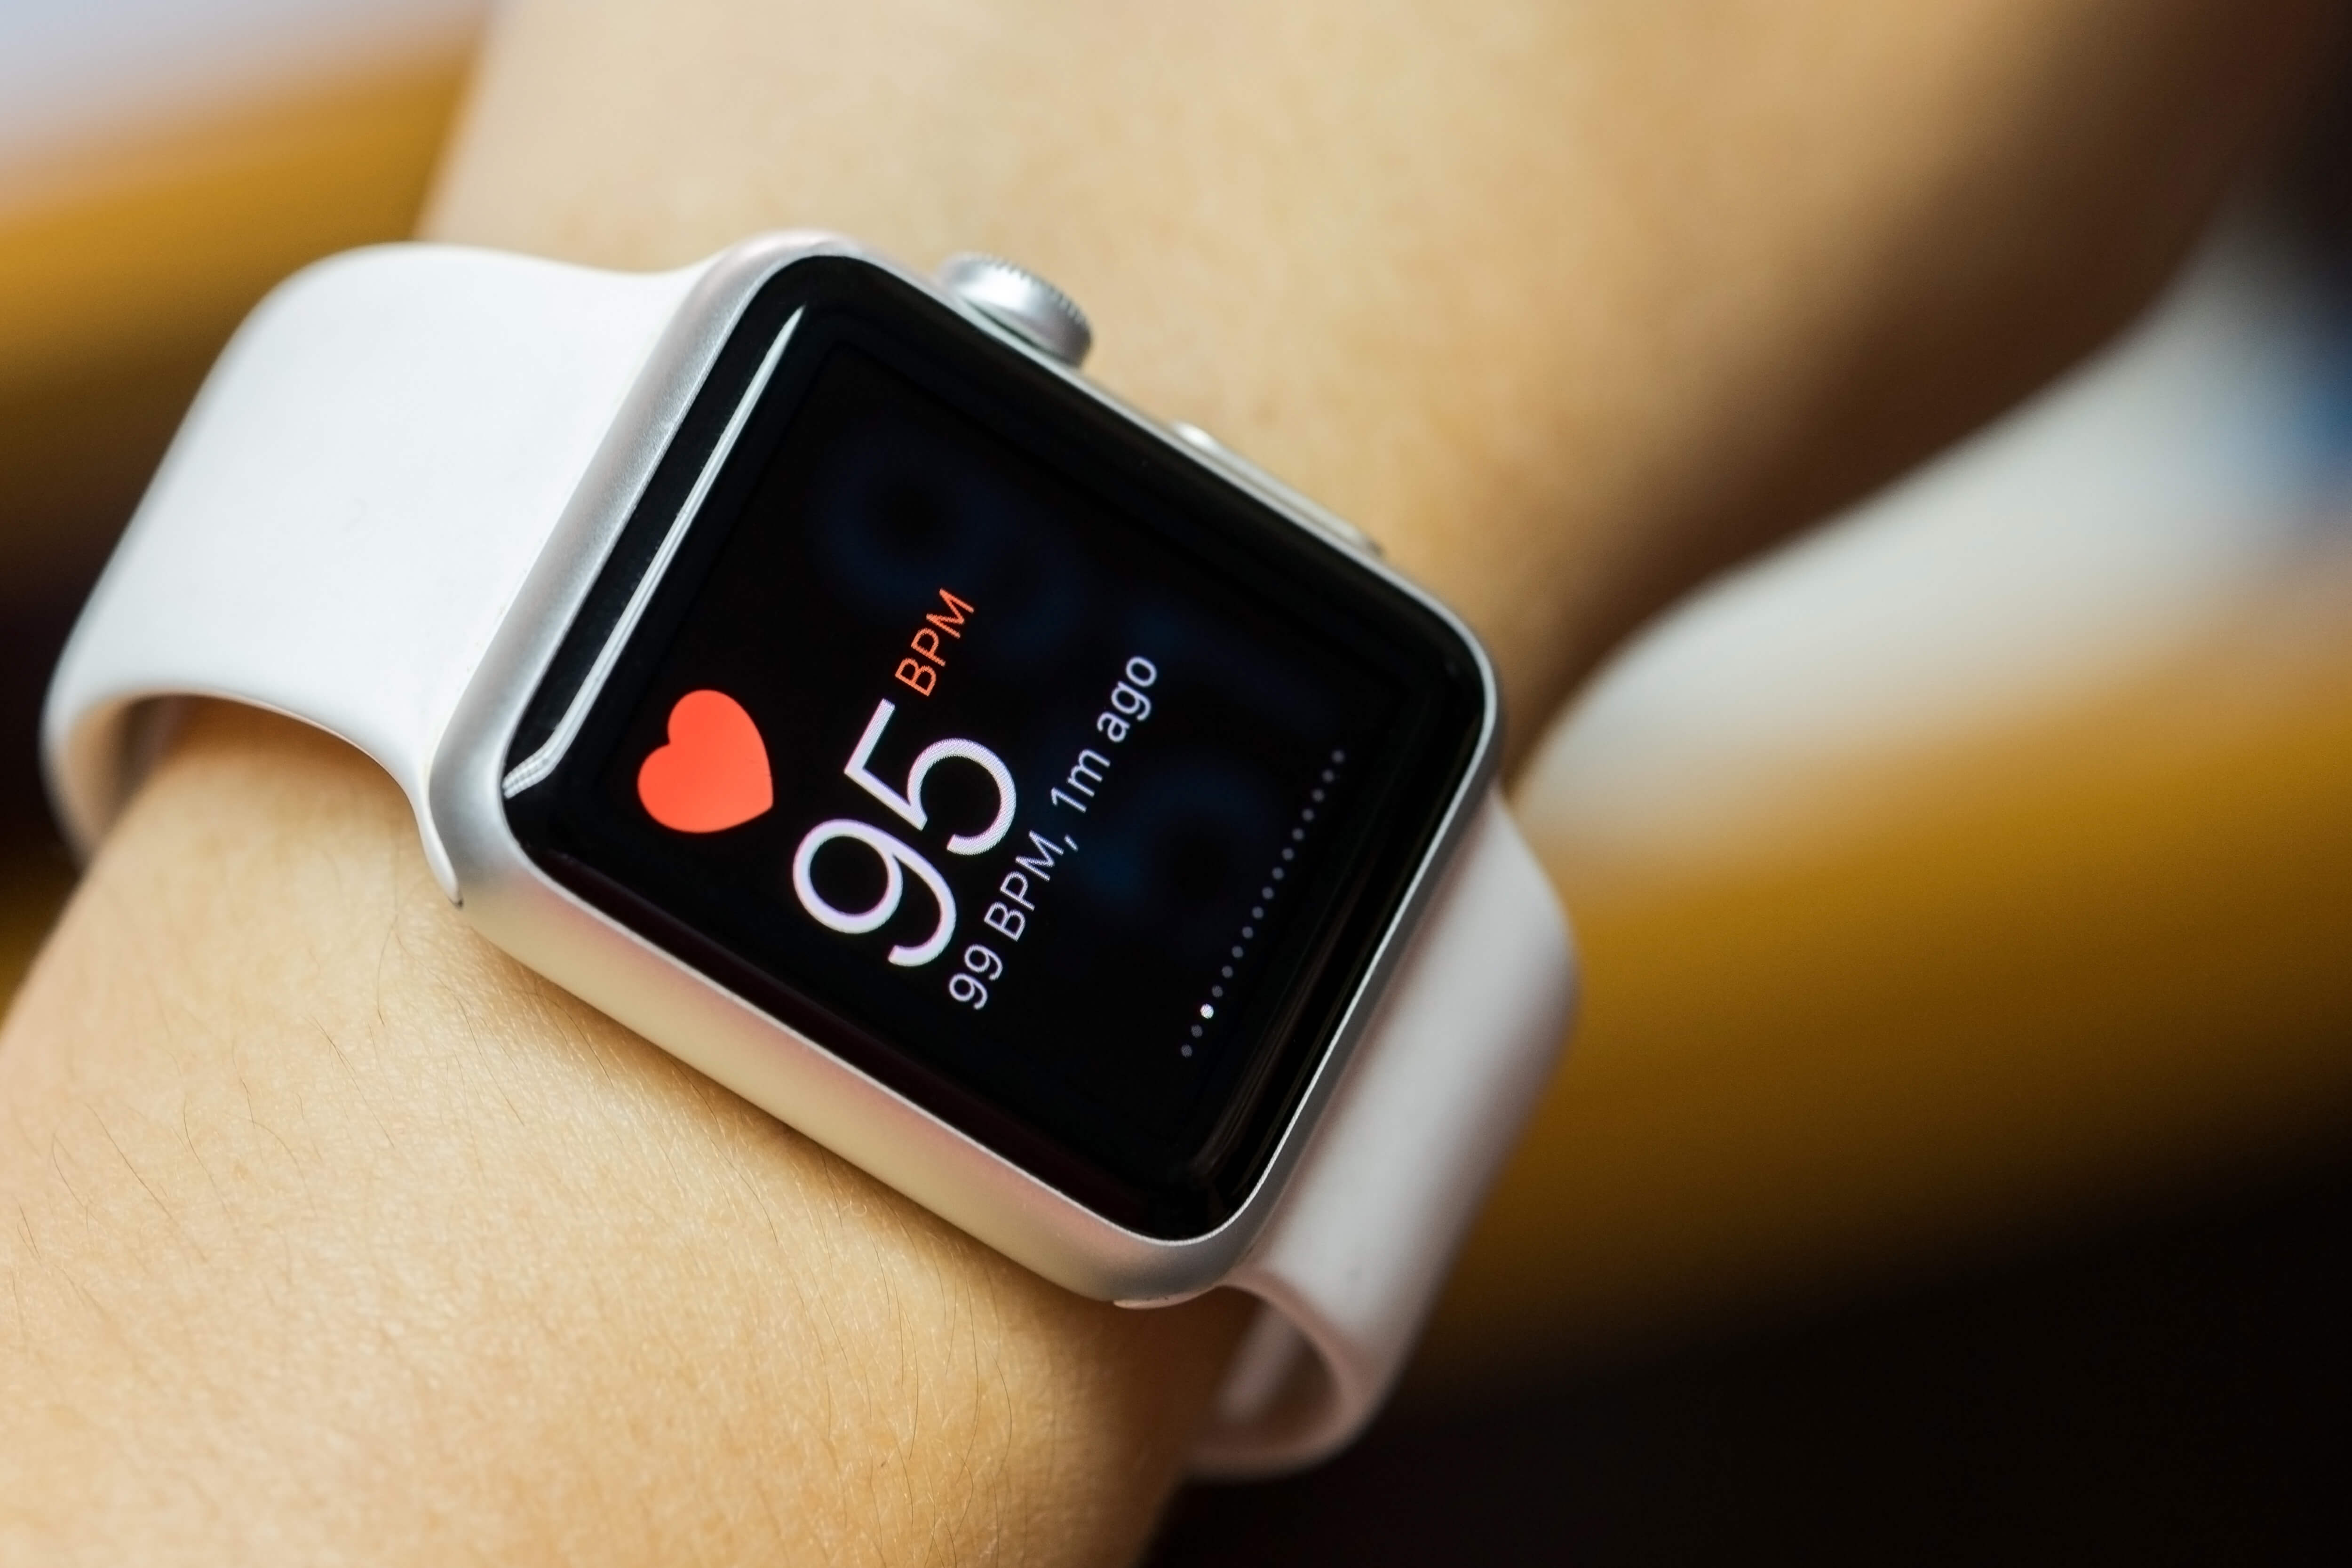 Wearable technology is finding use cases in business.